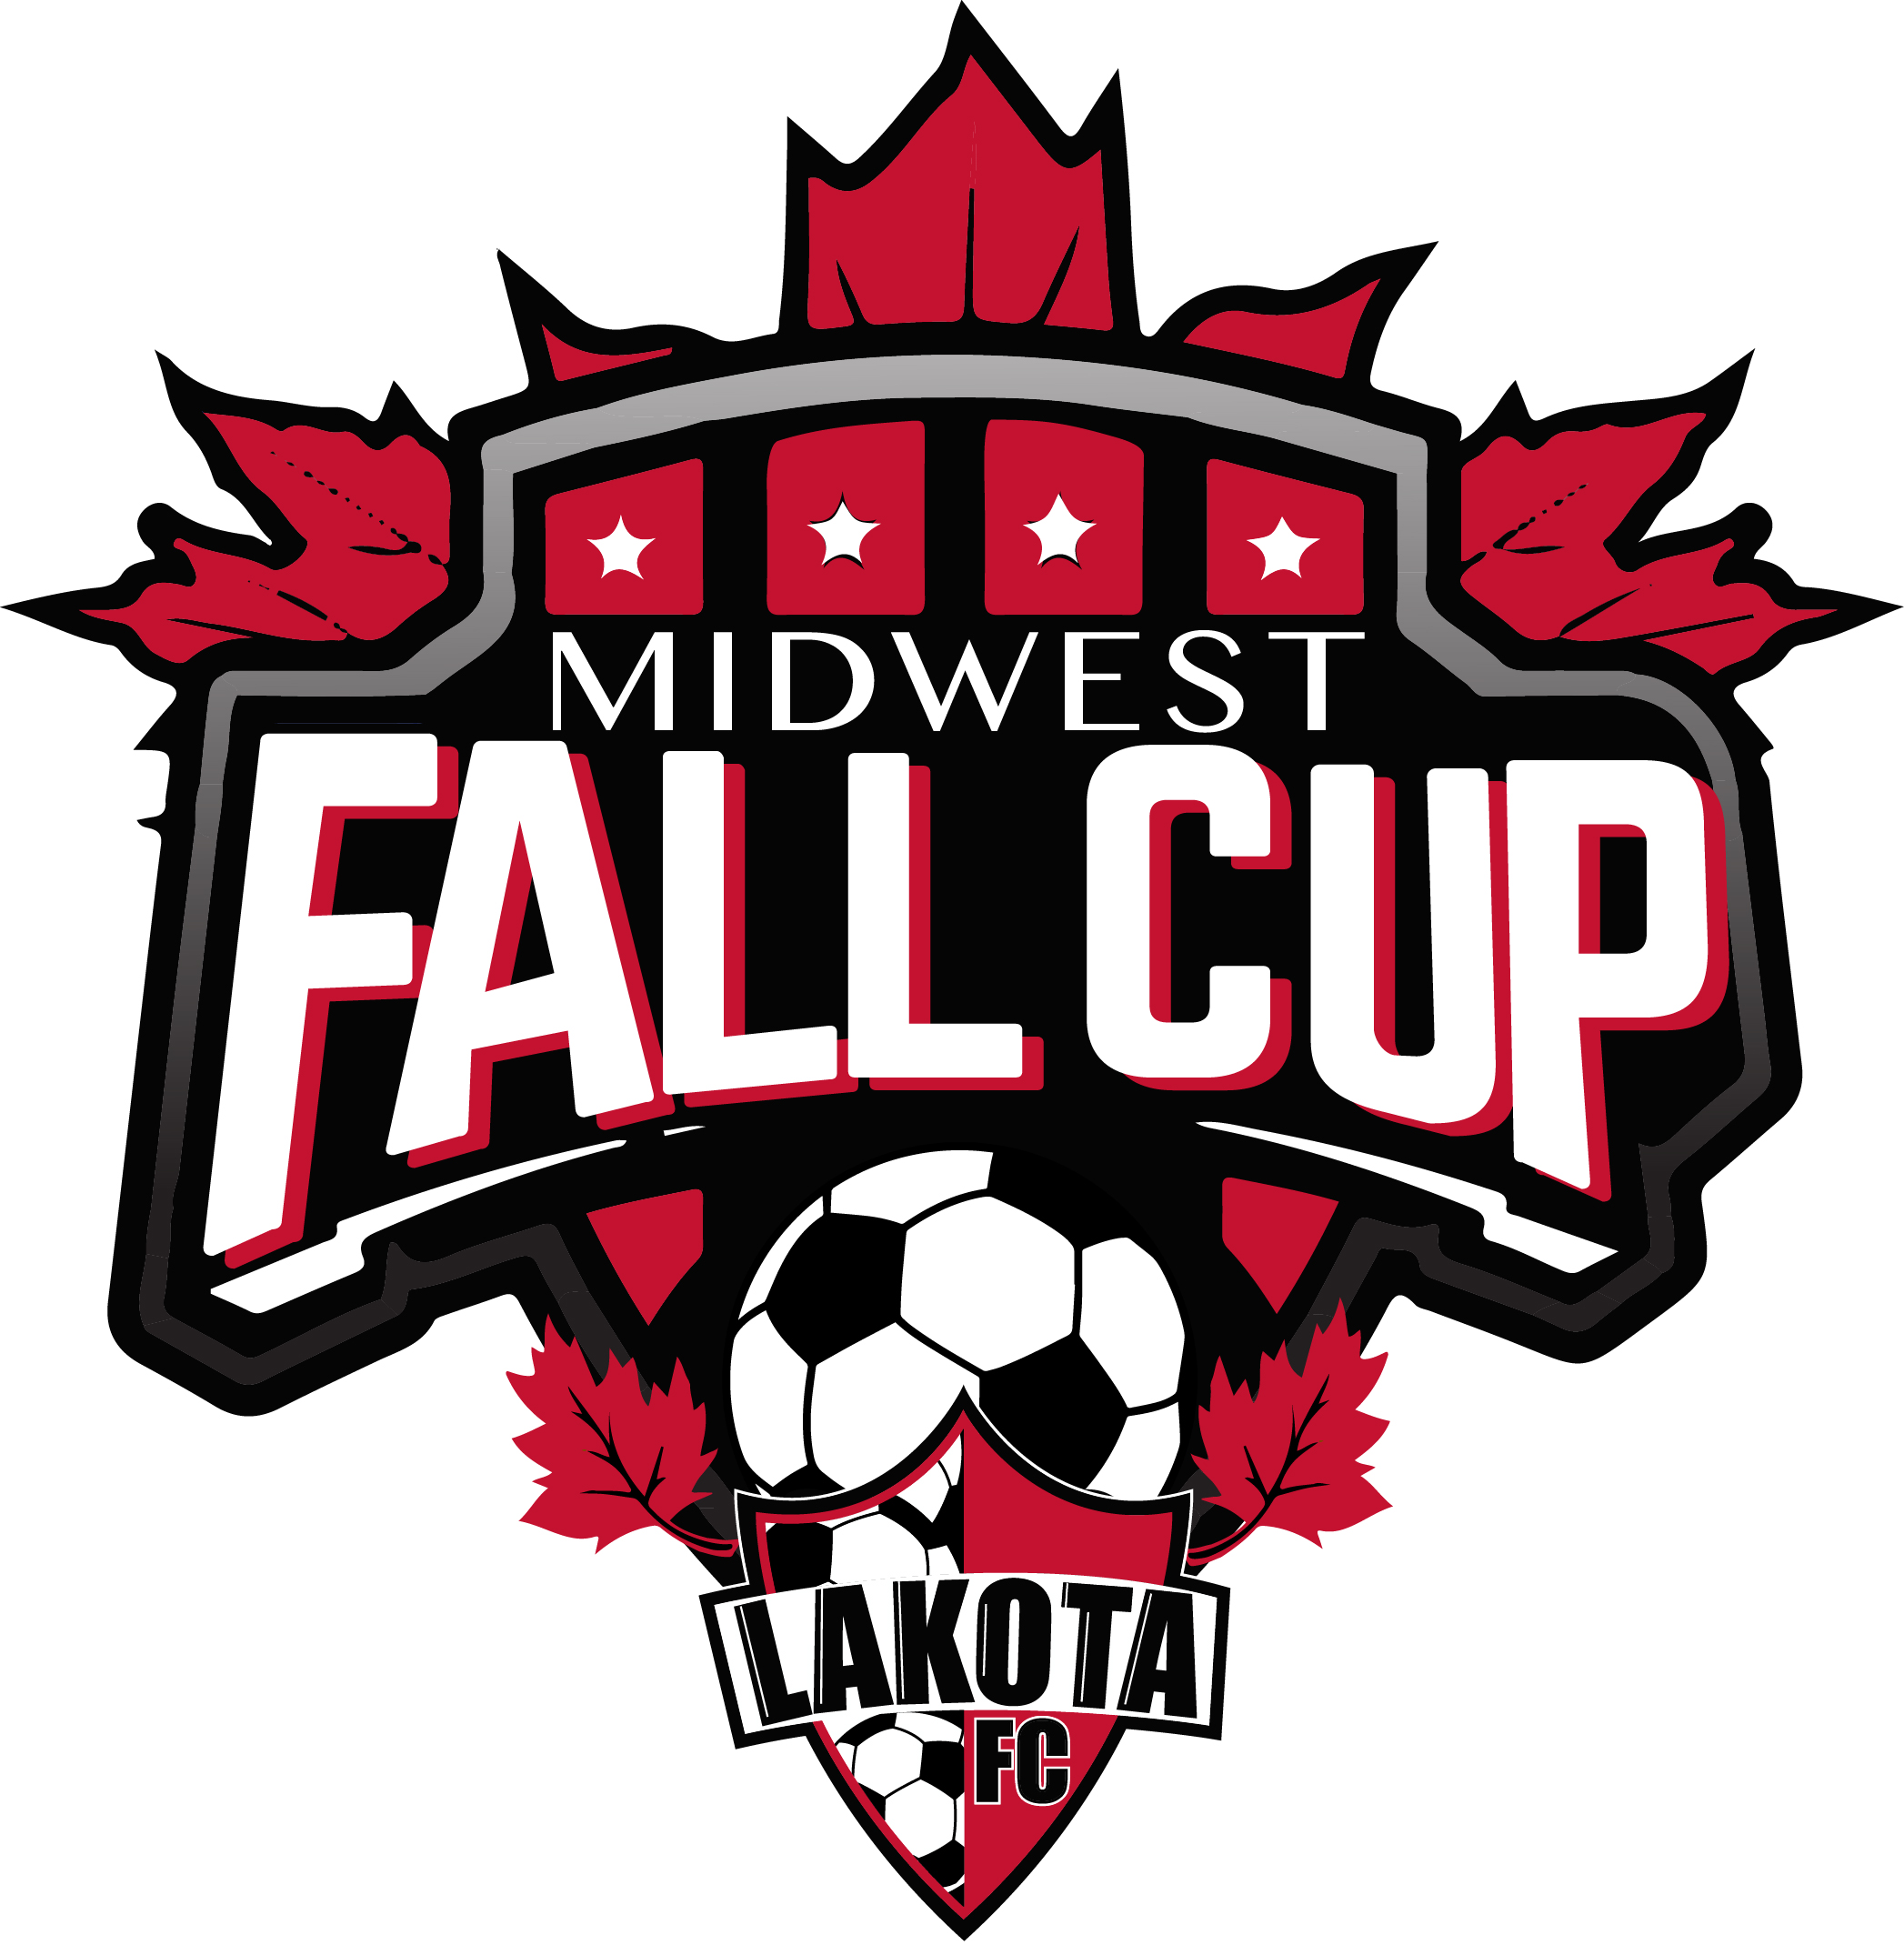 Midwest Fall Cup